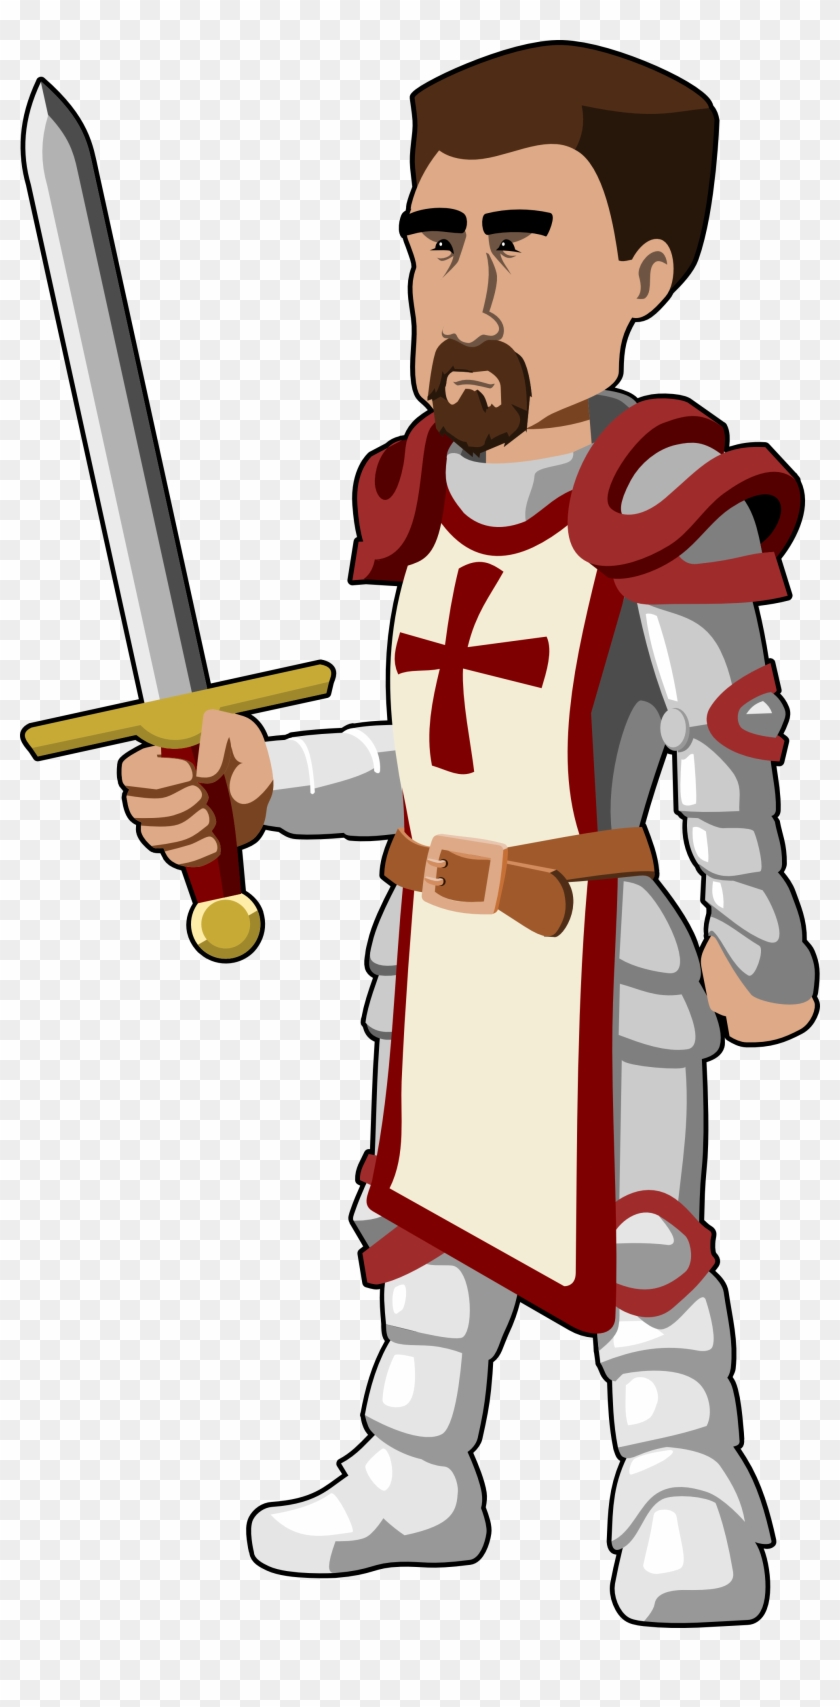 Lord clipart lord.